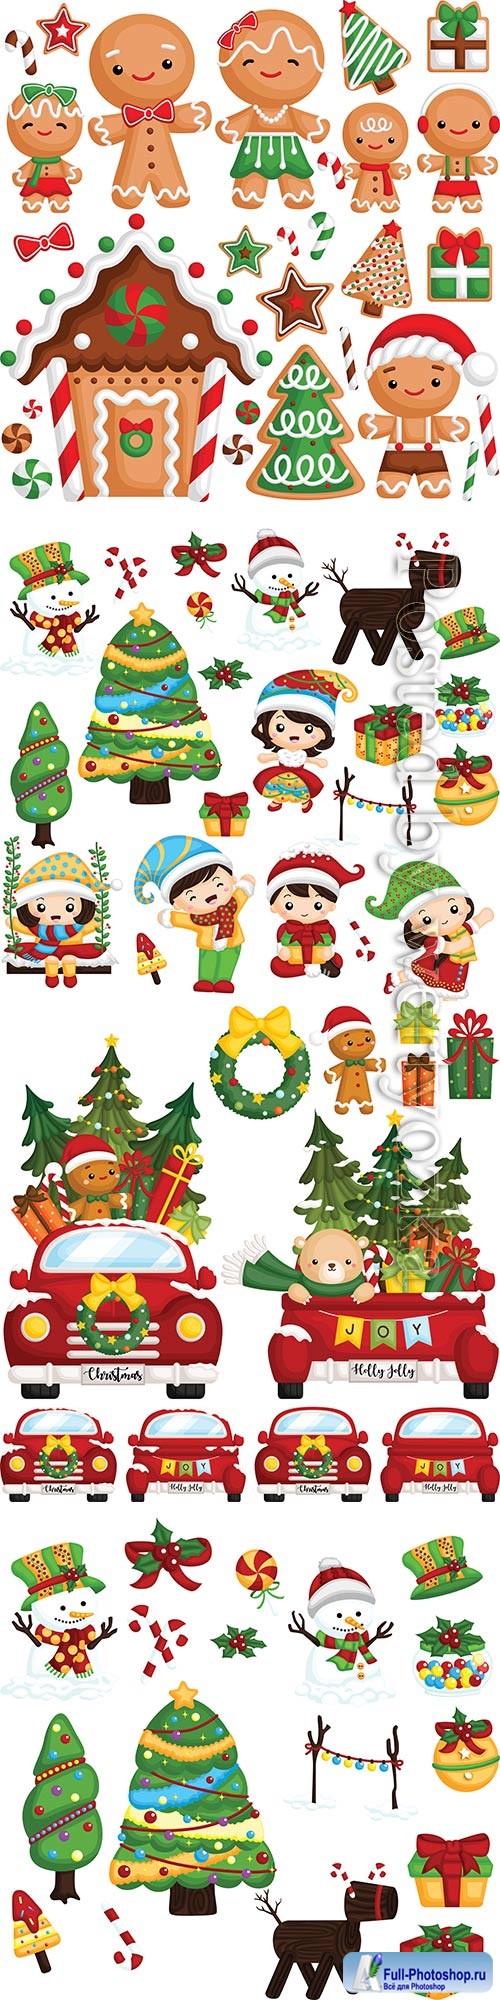 Christmas and New Year elements in vector